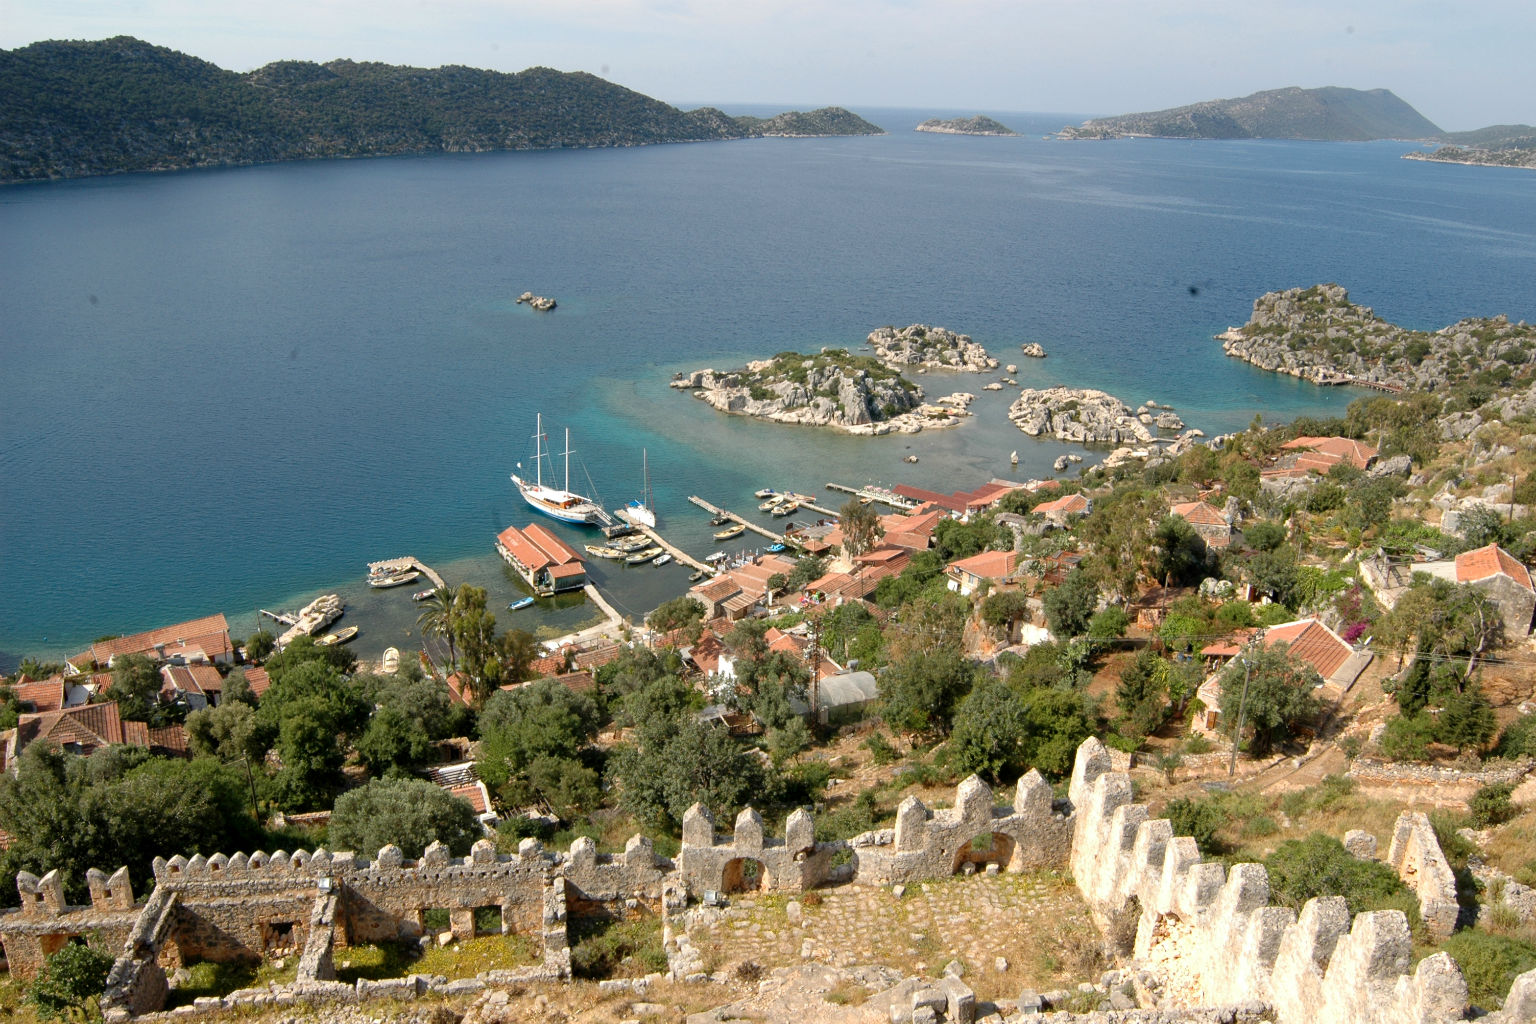 Yachts for Charter in Kekova